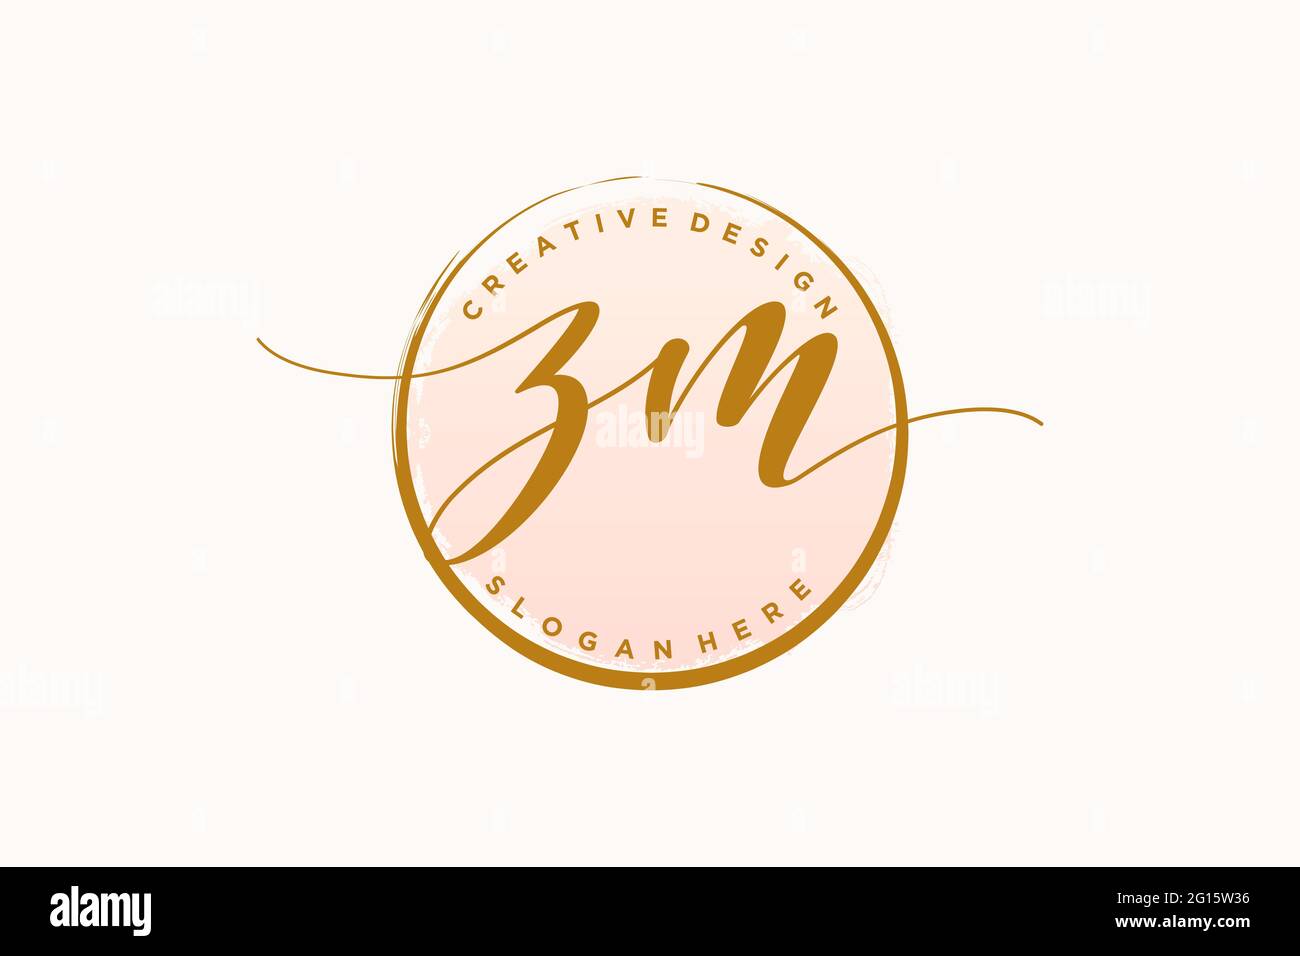 ZM handwriting logo with circle template vector signature, wedding, fashion, floral and botanical with creative template. Stock Vector